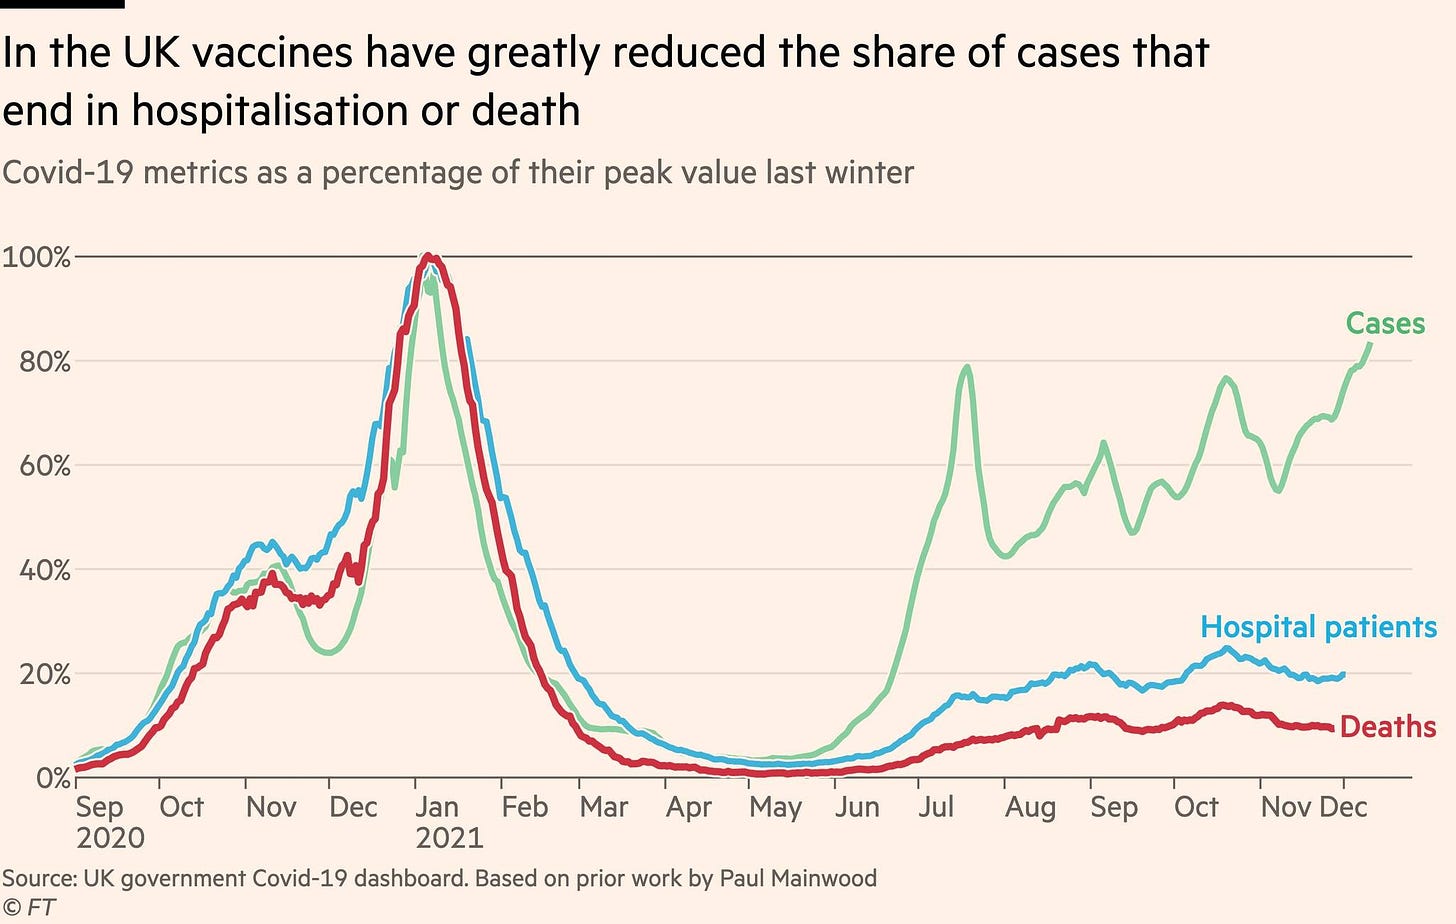 May be an image of text that says 'In the UK vaccines have greatly reduced the share of cases that end in hospitalisation or death Covid-19 metrics as a percentage of their peak value last winter 100% 80% 60% 40% Cases 20% Nov Dec Hospital patients Mar Sep Oct Jan Feb 2020 2021 Source: UK government Covid-19 dashboard. Based on prior work by Paul Mainwood ©FT Apr May Jun Jul Deaths Aug Sep Oct Nov Dec'